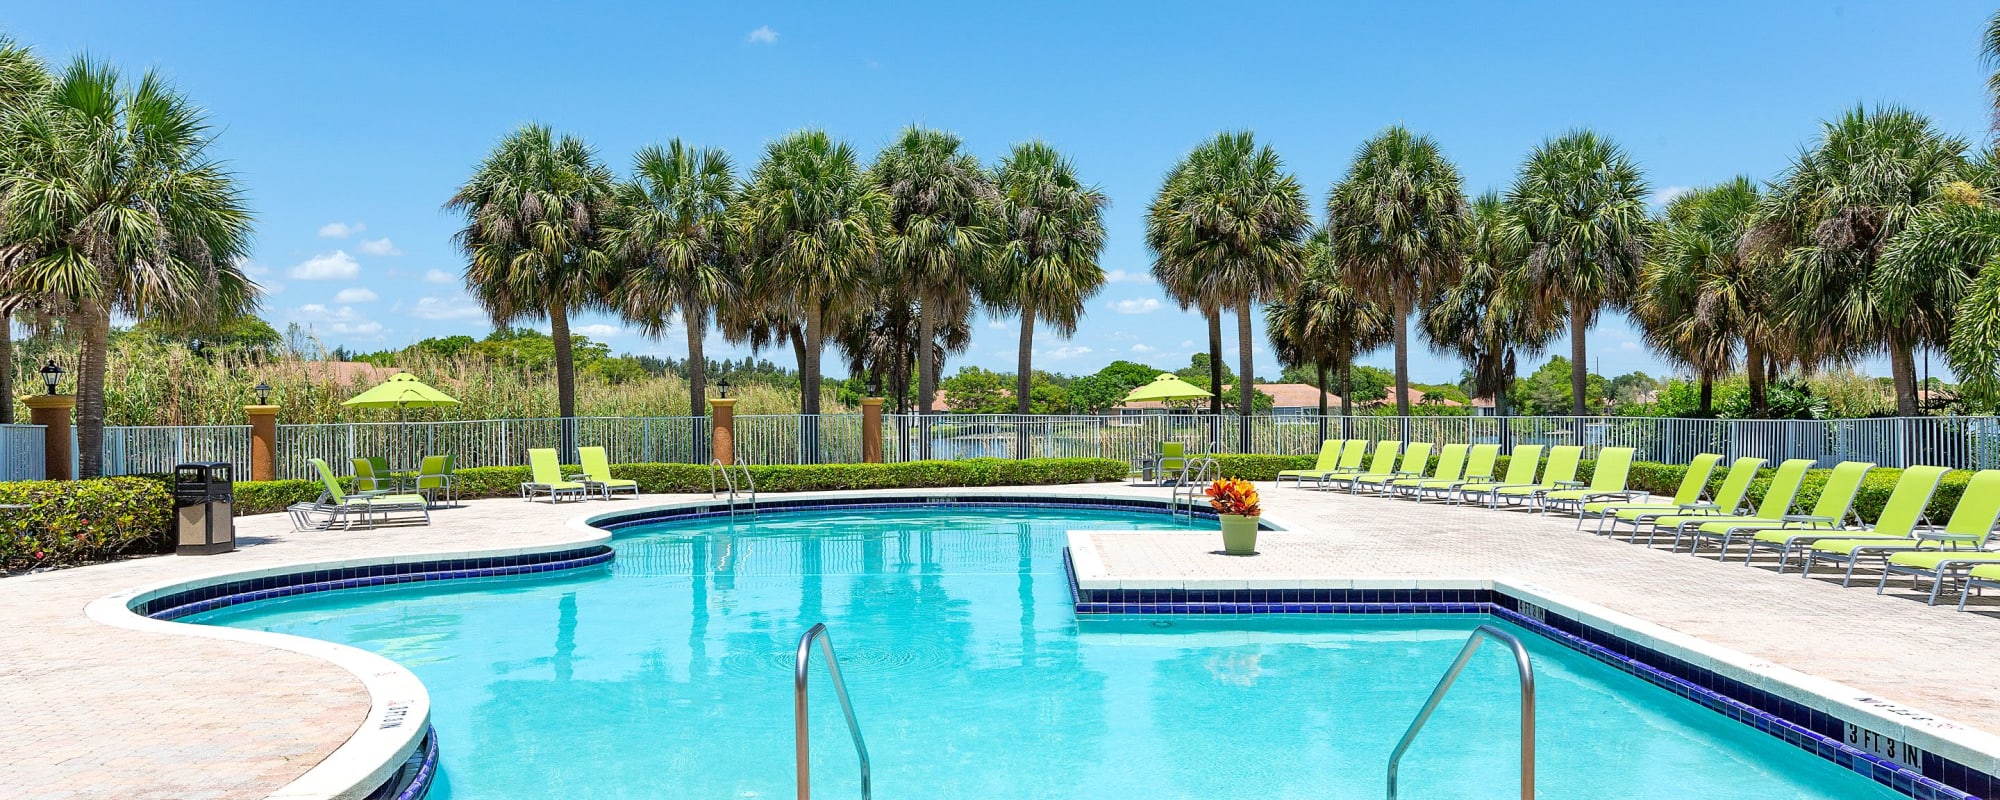 Map and directions to Whalers Cove Apartments in Boynton Beach, Florida